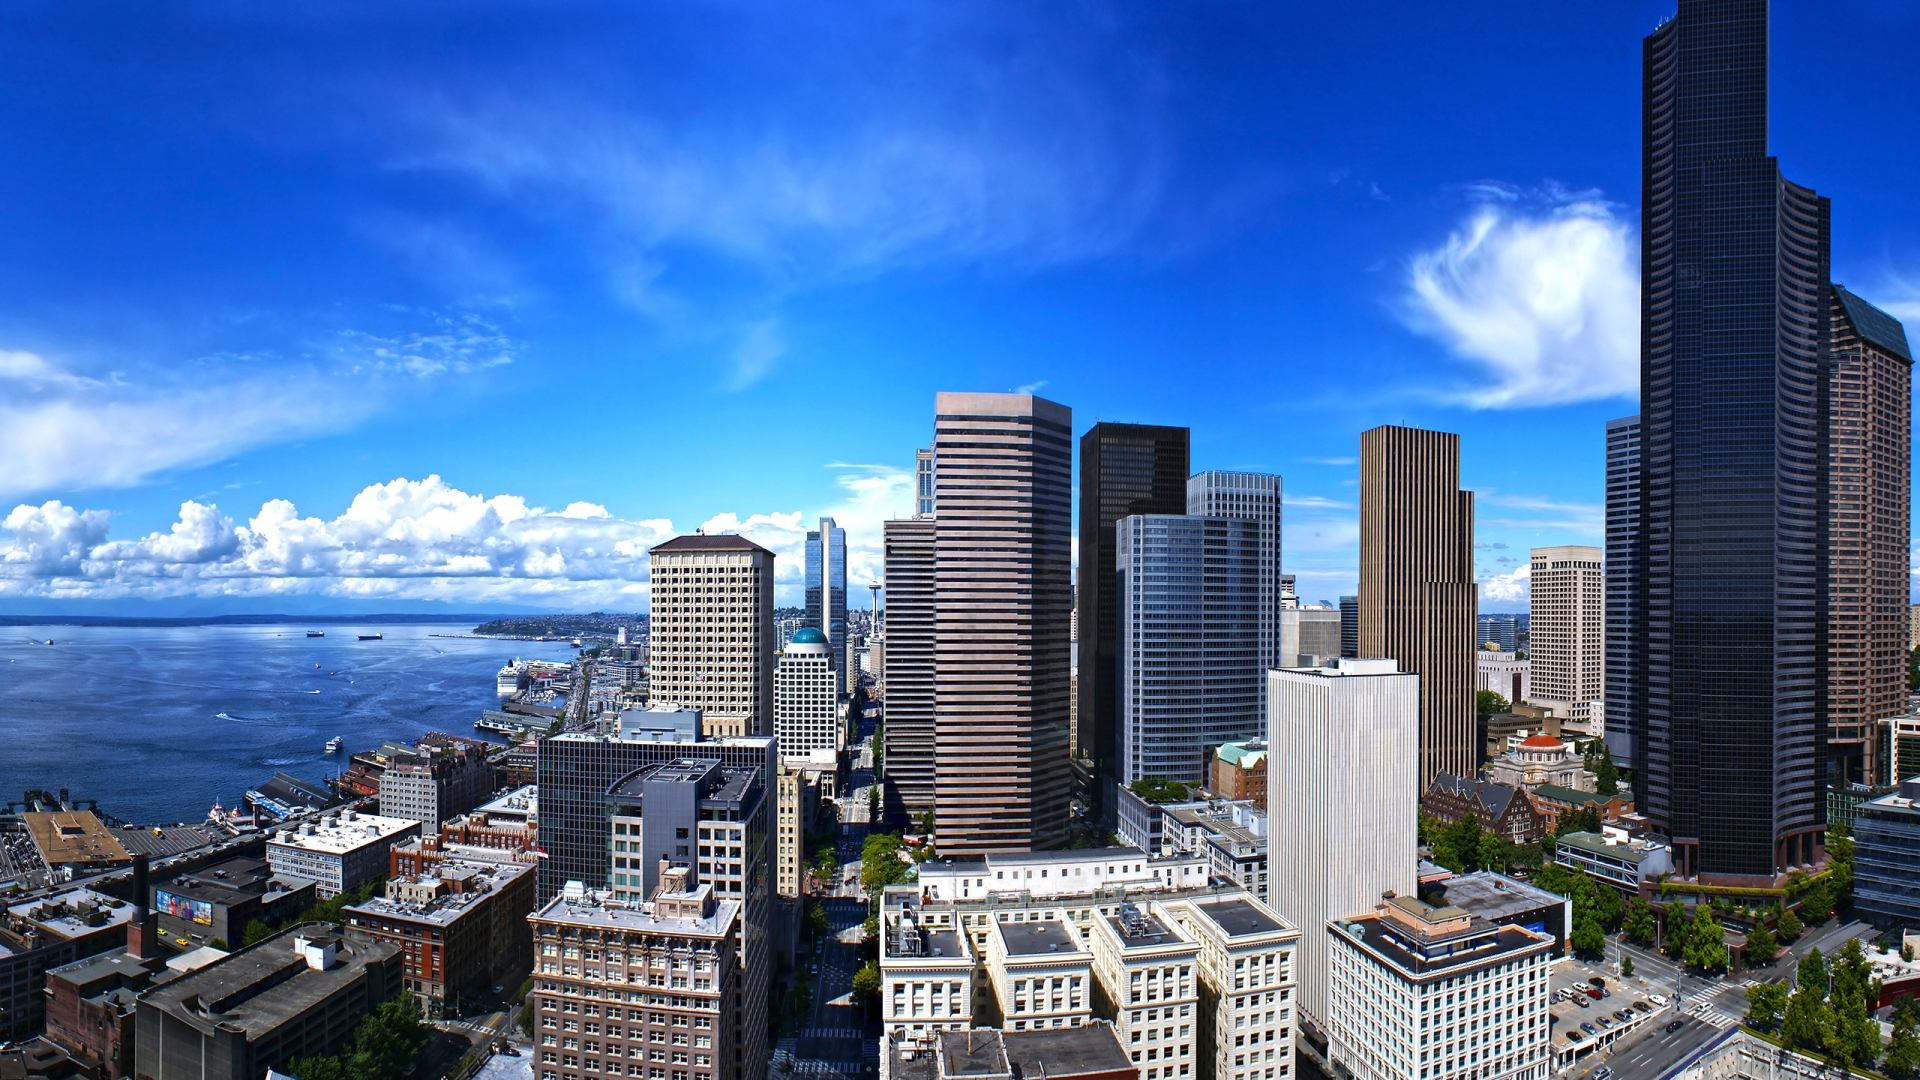 Seattle Town for 1920 x 1080 HDTV 1080p resolution